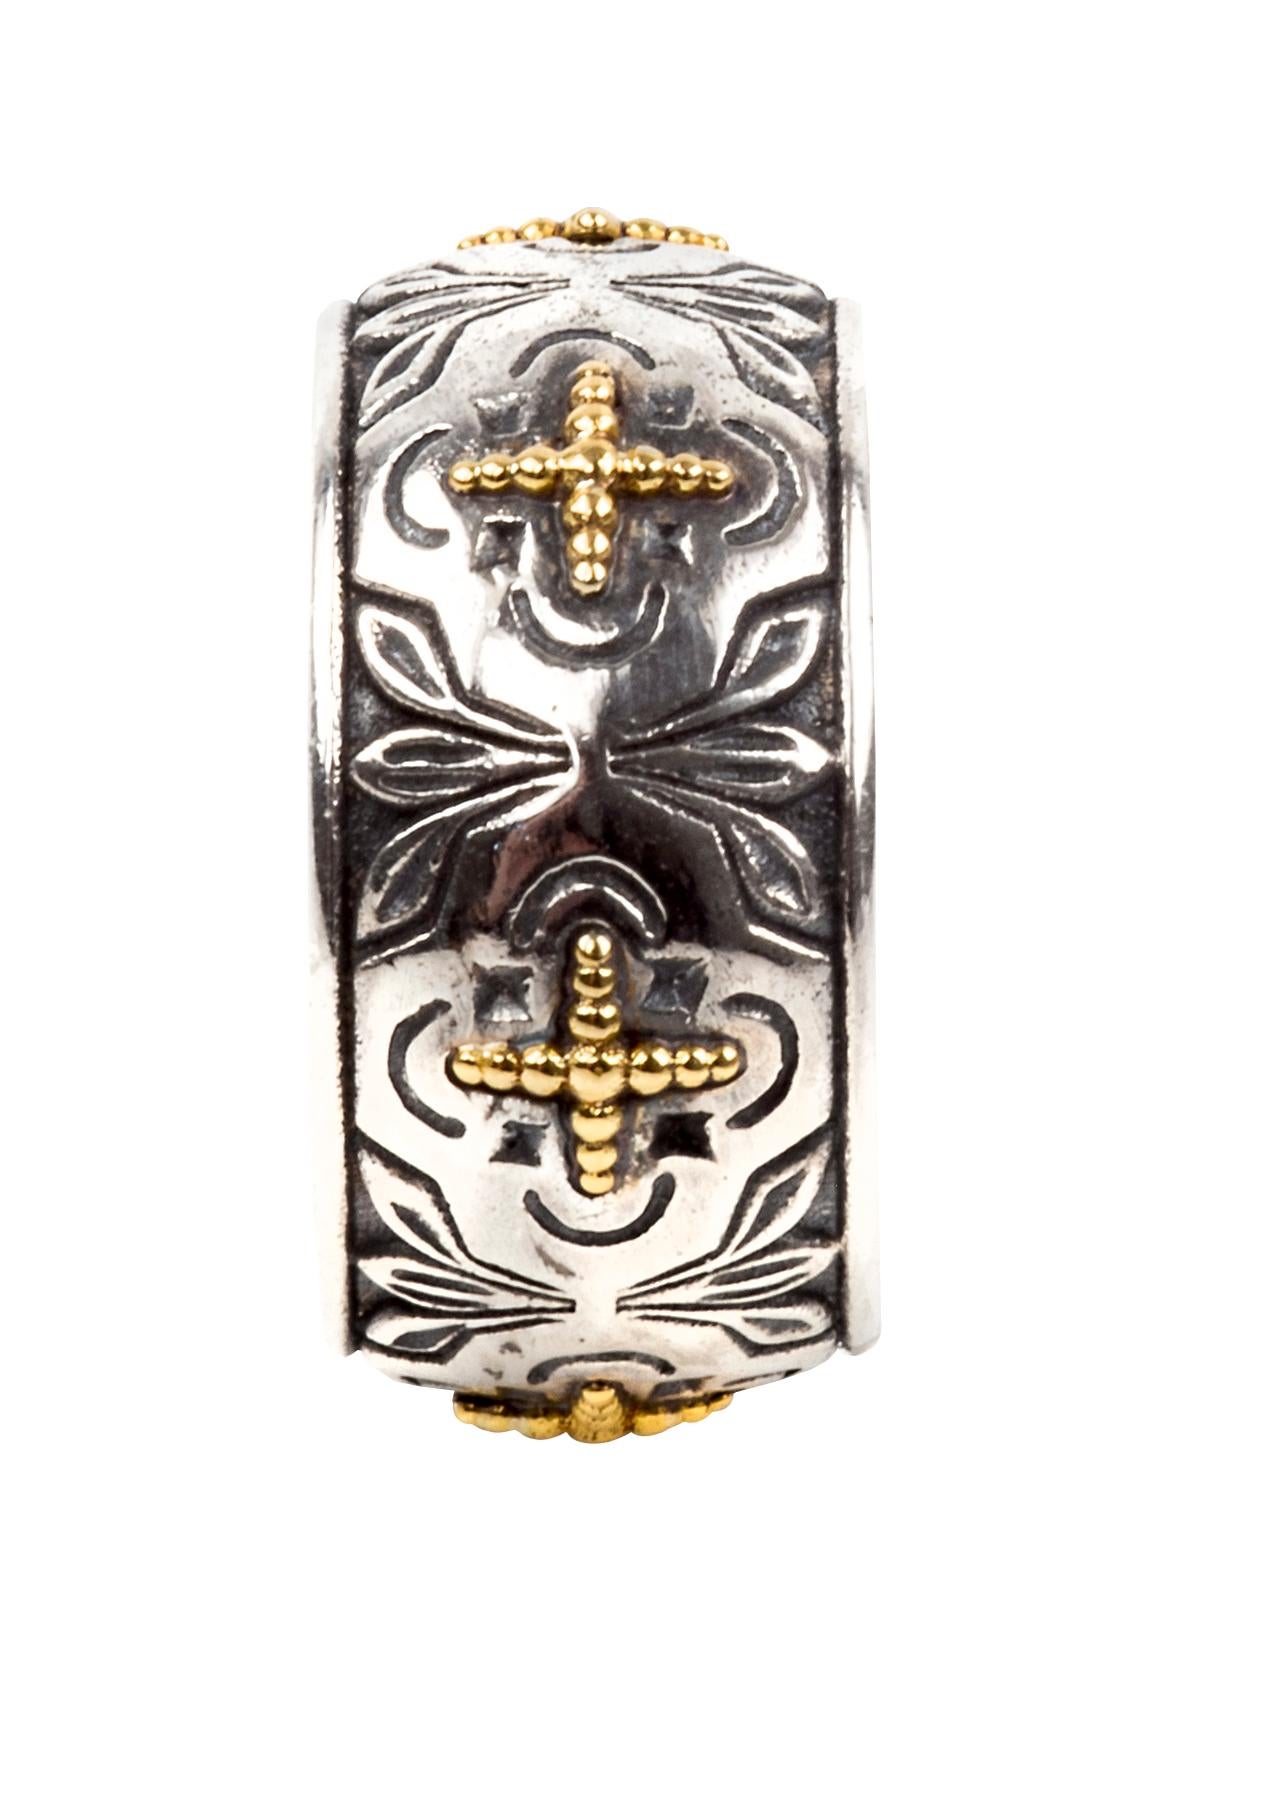 18K Yellow Gold accents on Sterling Silver with Cross Detail.  
Made by renowned Greek Designer Konstantino. 